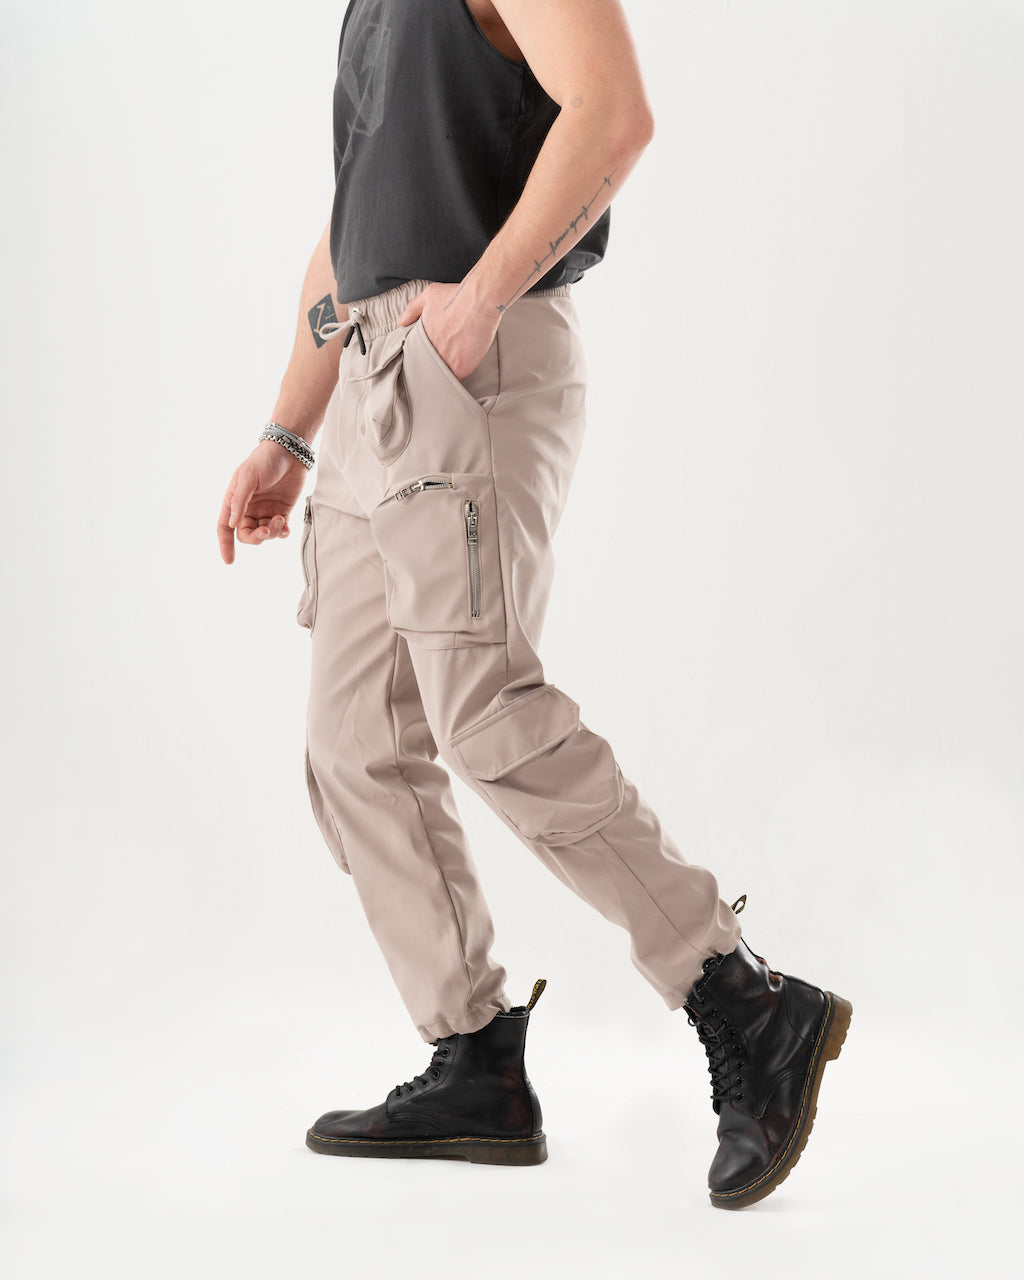 A man in a comfortable black tank top and AMBITION JOGGERS, showcasing style and function.